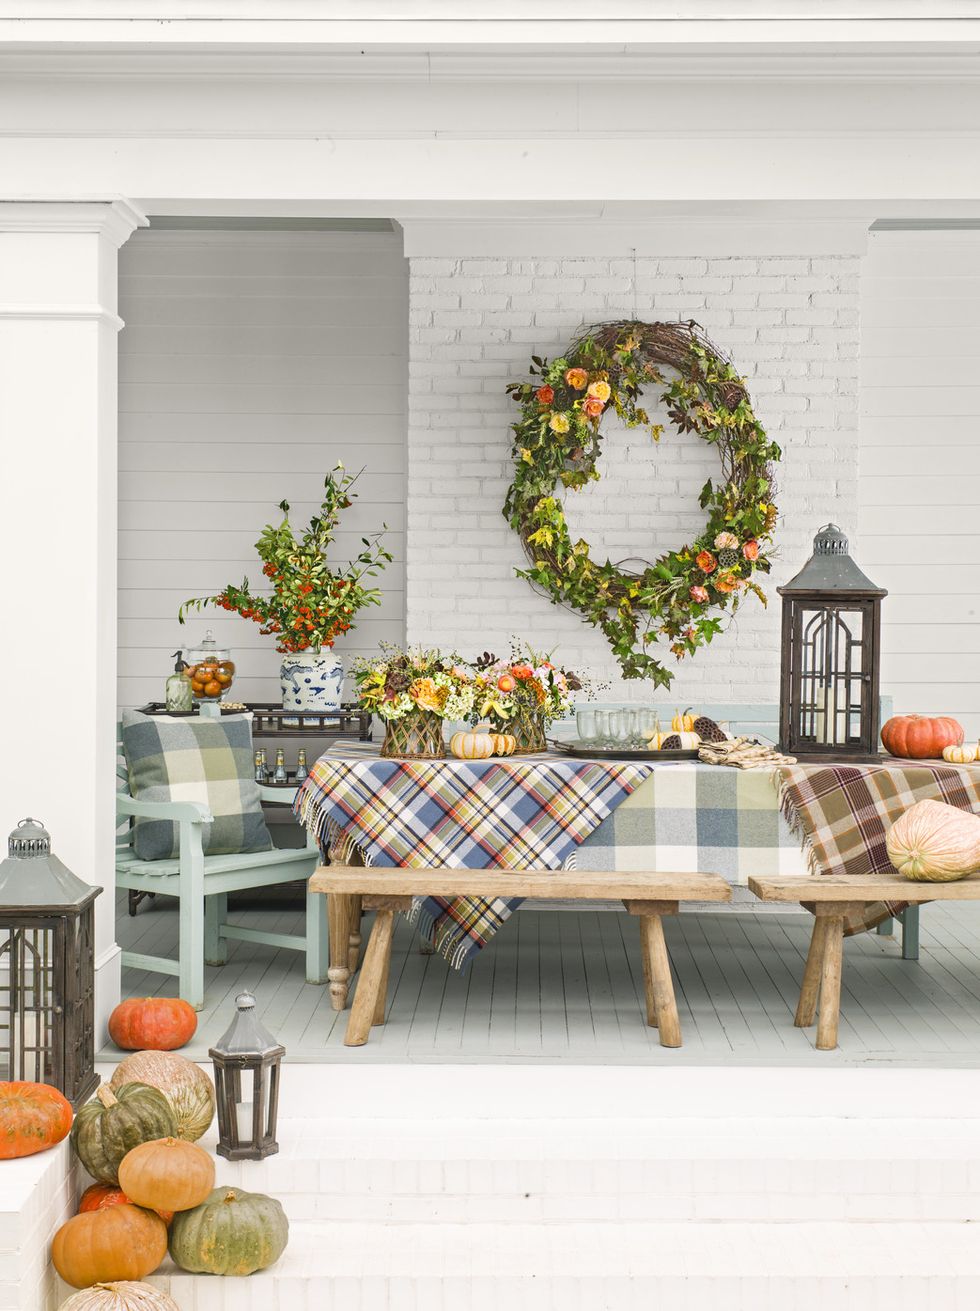 https://hips.hearstapps.com/hmg-prod/images/fall-porch-decorating-2-1625786766.jpg?crop=1xw:1xh;center,top&resize=980:*